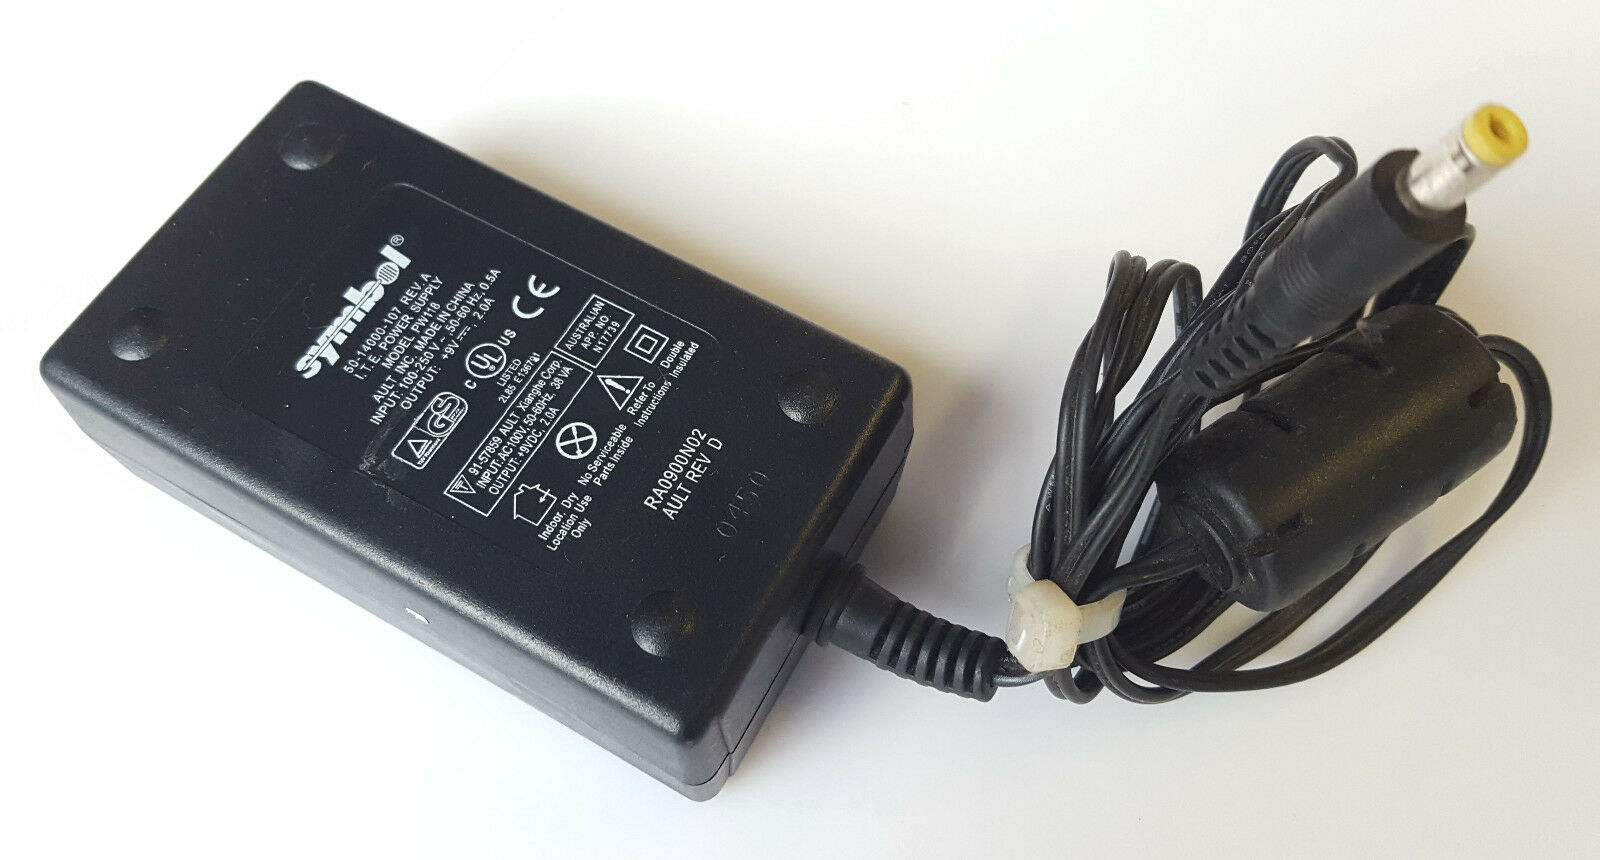 SYMBOL PW118 AC/DC POWER SUPPLY ADAPTER 50-14000-107 REV.A 9V 2.0A Country/Region of Manufacture: Australia Manufac